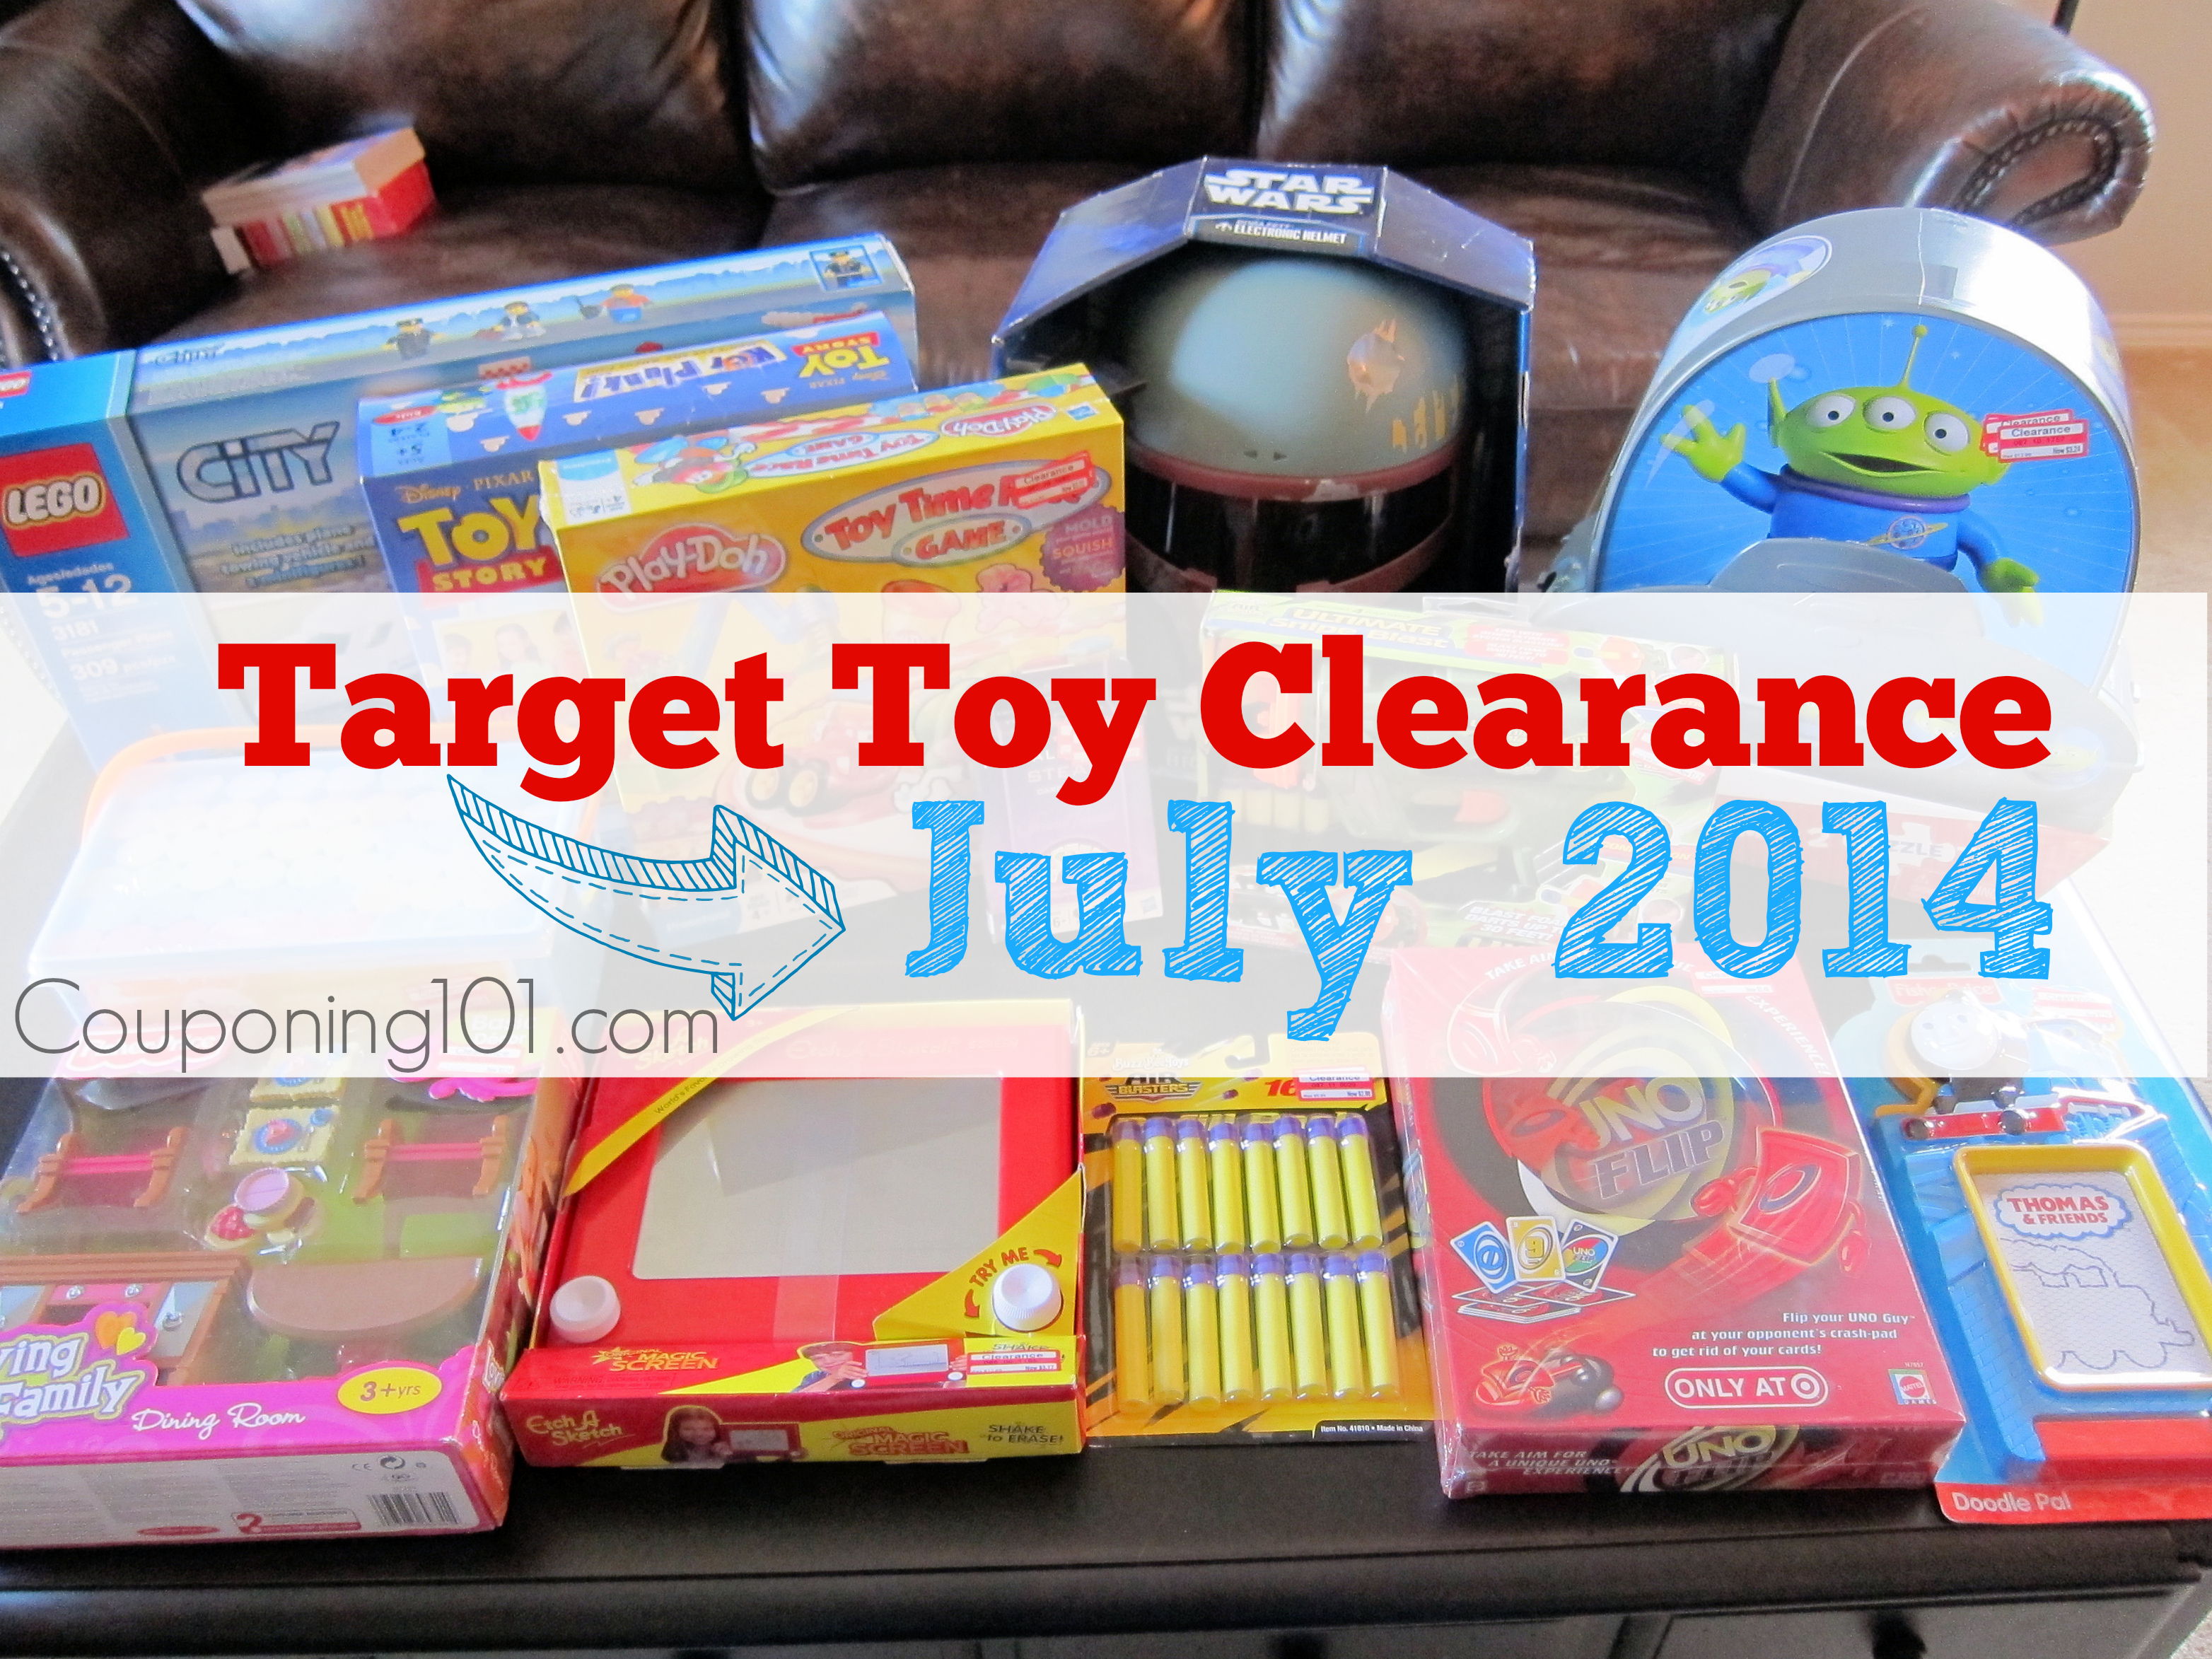 Get ready! Target toy clearance is coming! Save up to 70% off toys in July!